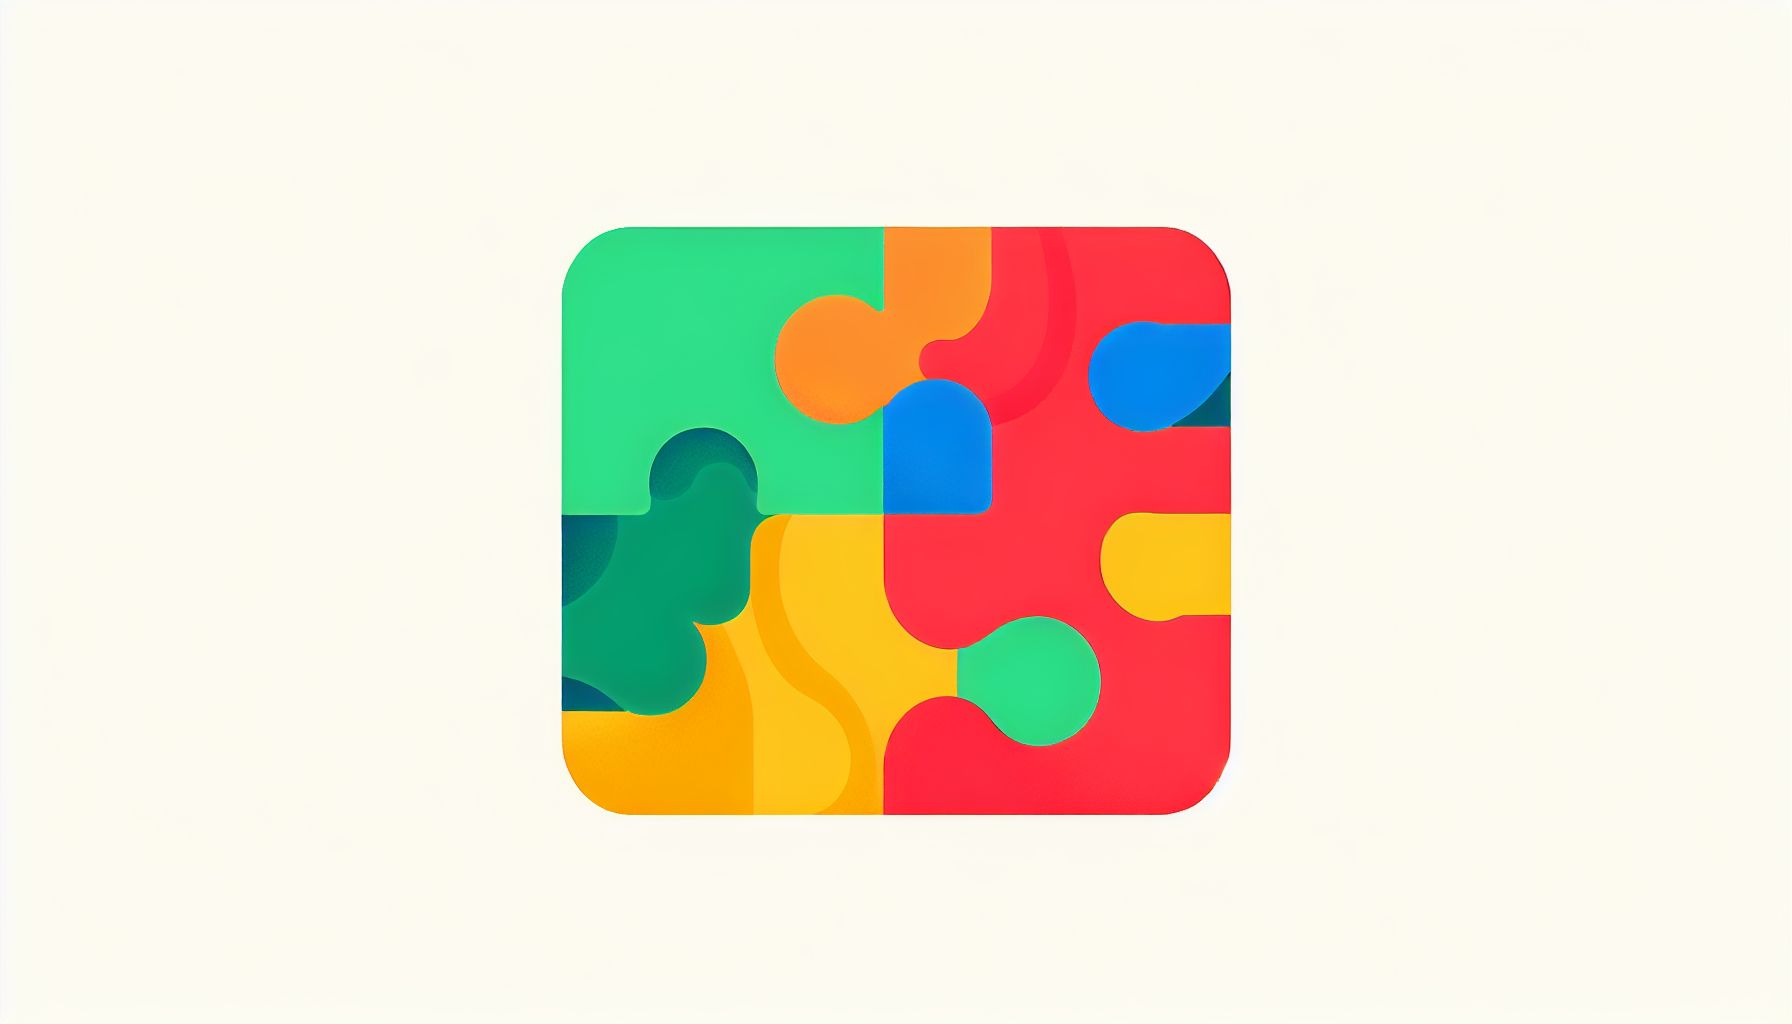 Puzzle in flat illustration style and white background, red #f47574, green #88c7a8, yellow #fcc44b, and blue #645bc8 colors.